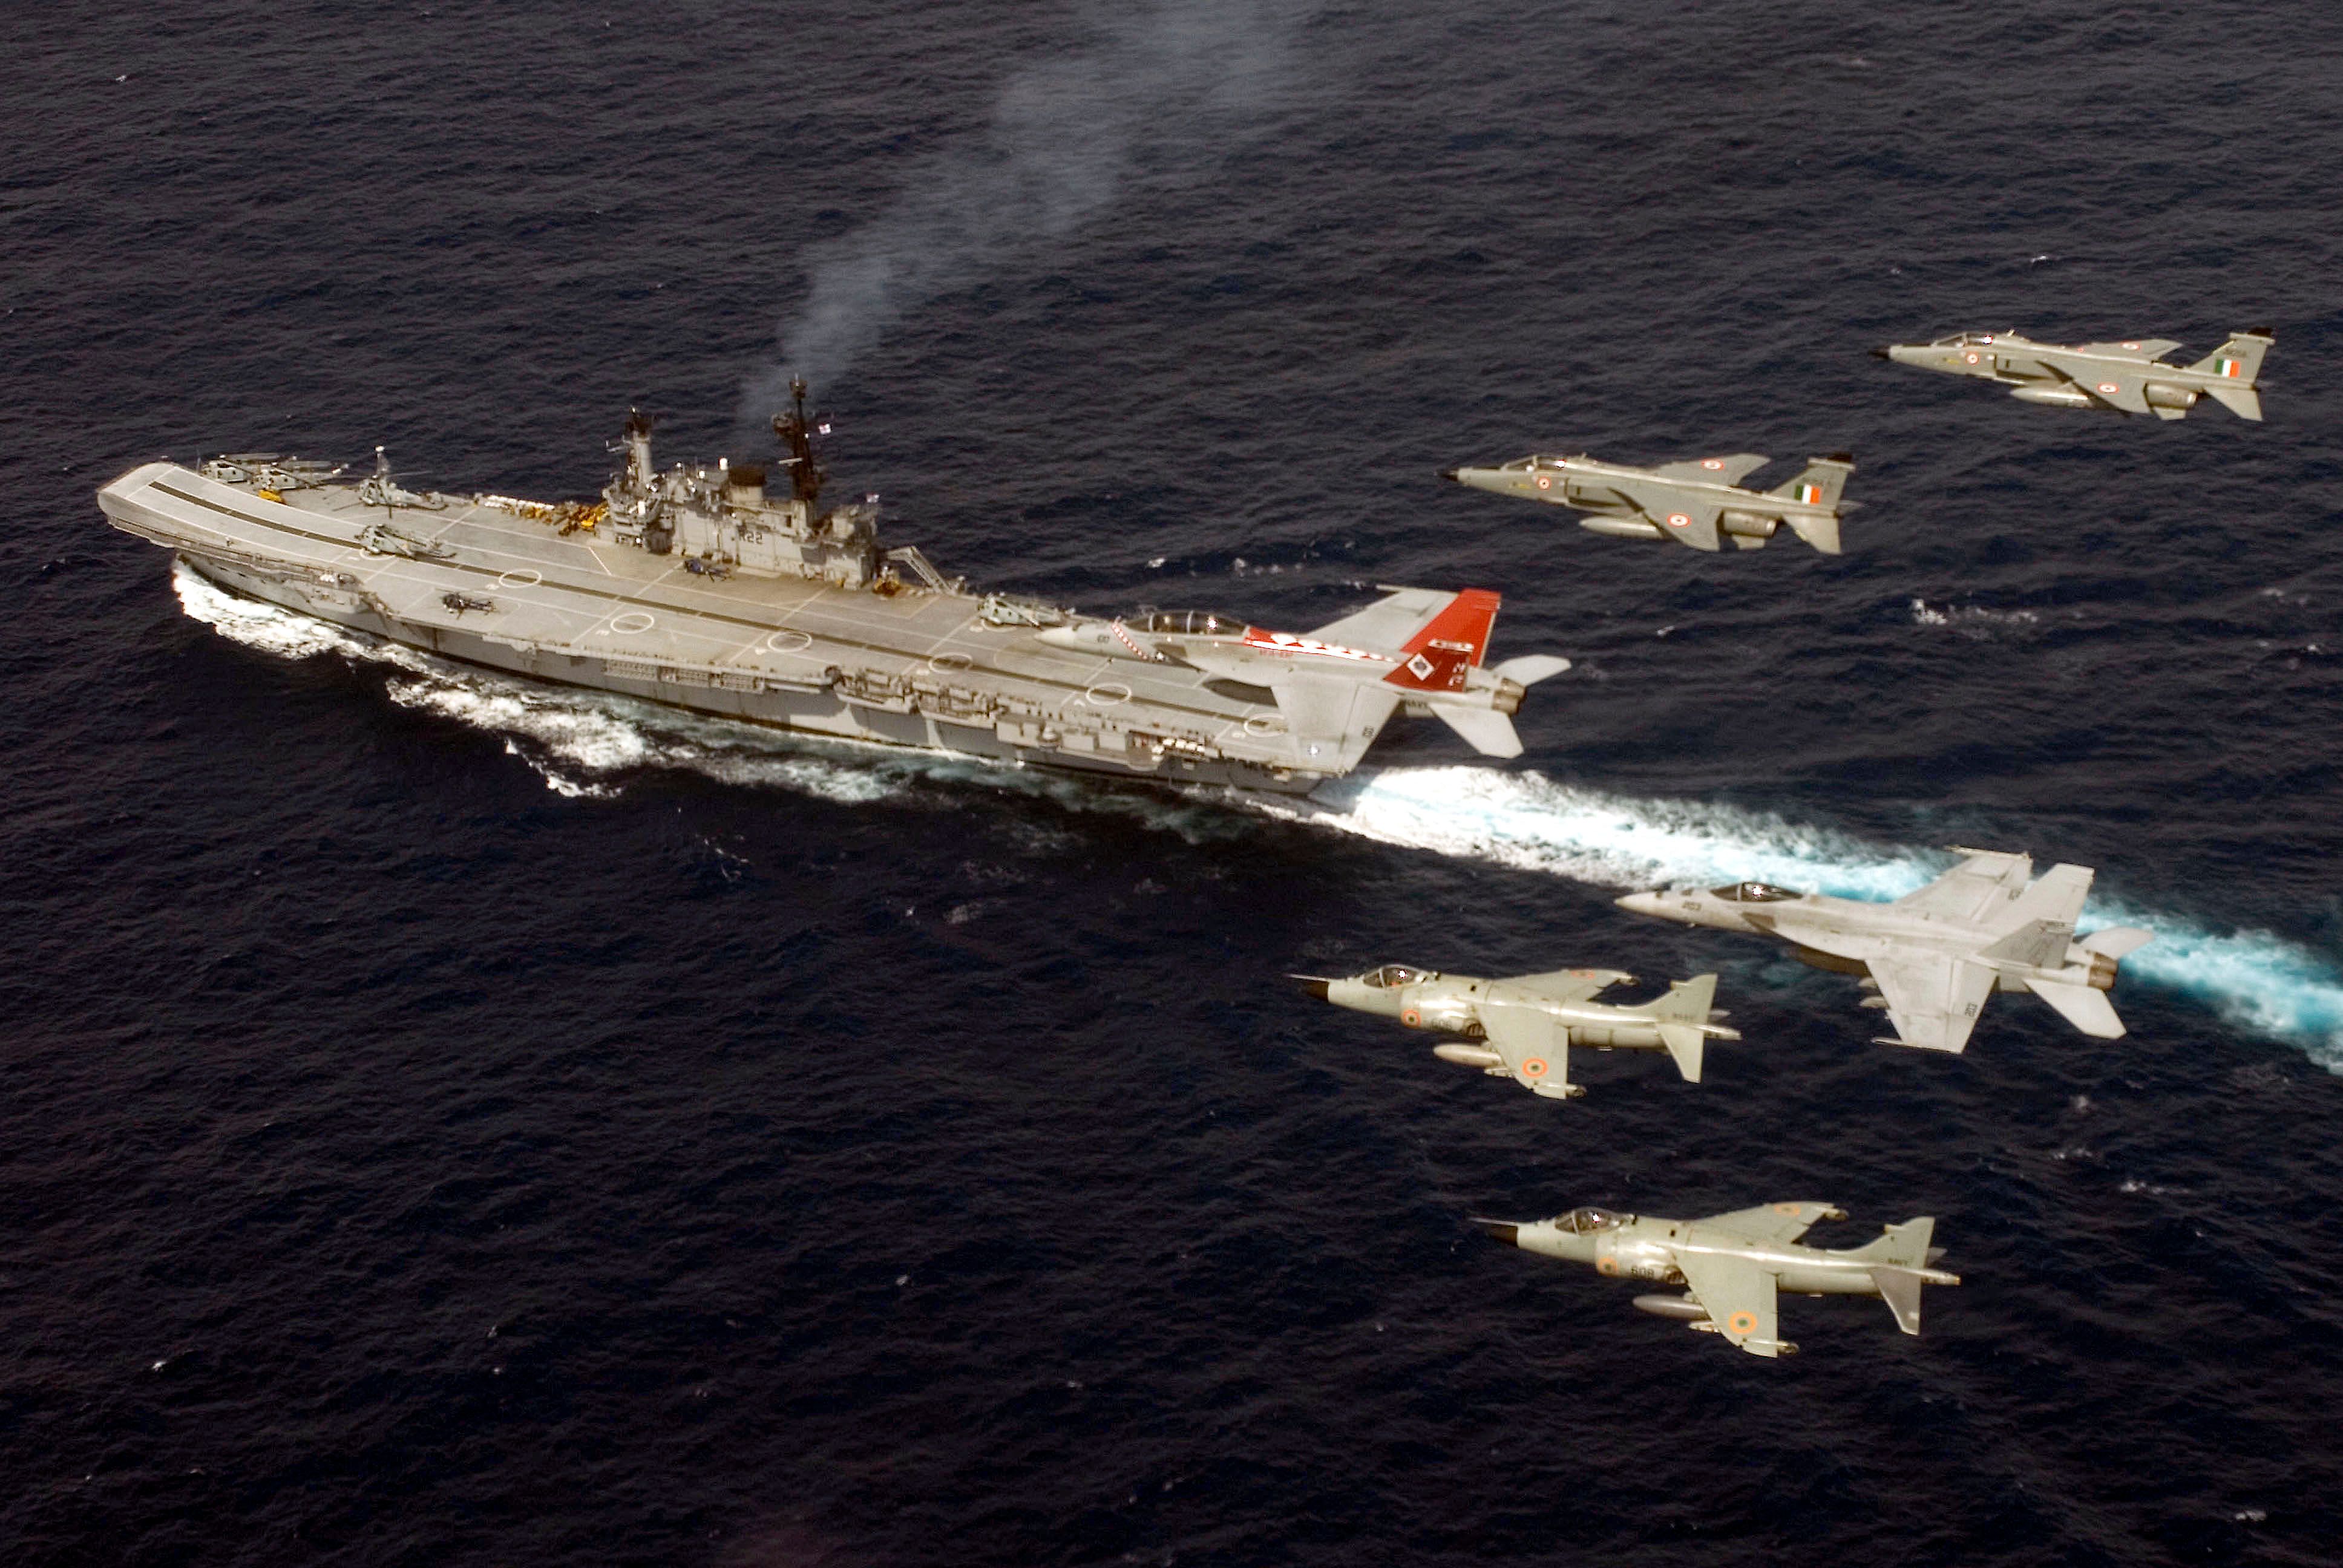 Several Indian Air Force SEPECAT Jaguar Attack fighters flying above an aircraft carrier.